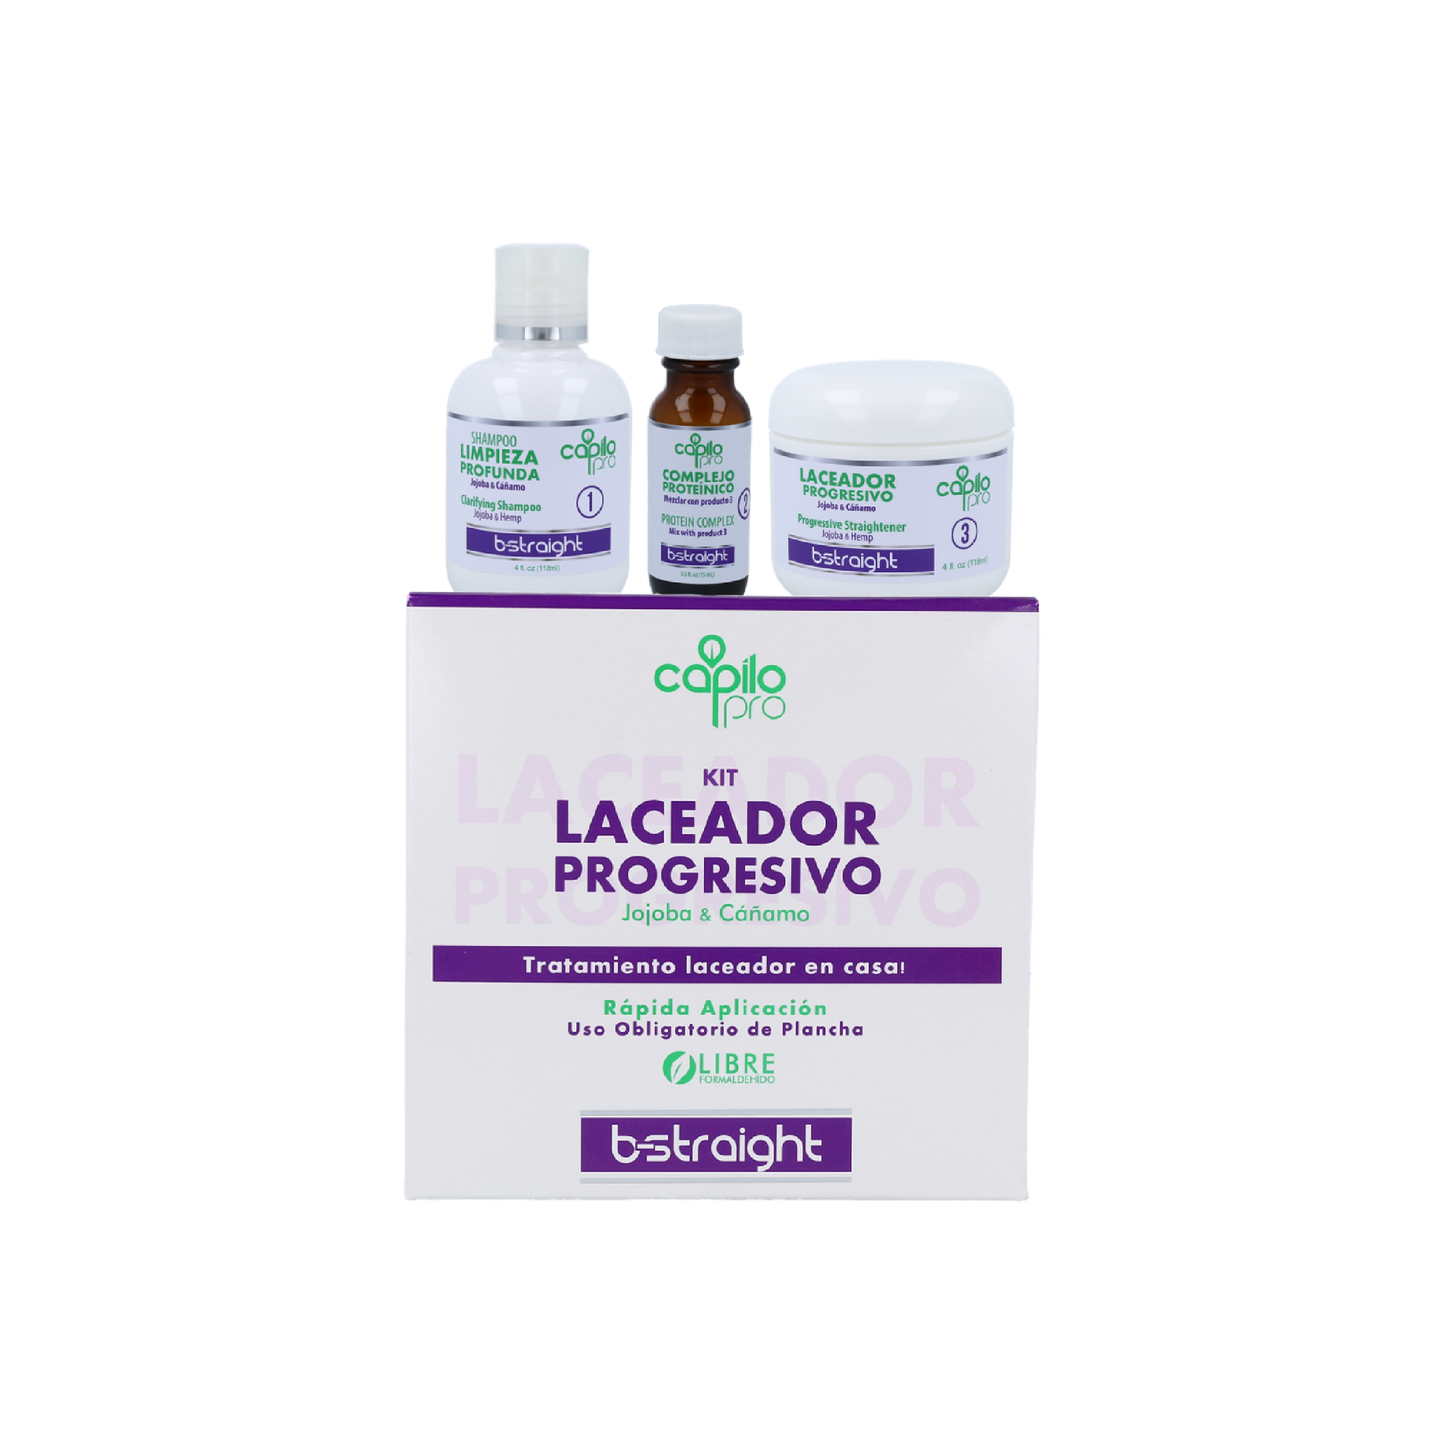 Capilo Pro B Straight Progressive Laceator Kit 4 oz. | Jojoba Oil and Hemp Oil | For frizzy hair | Without formaldehyde